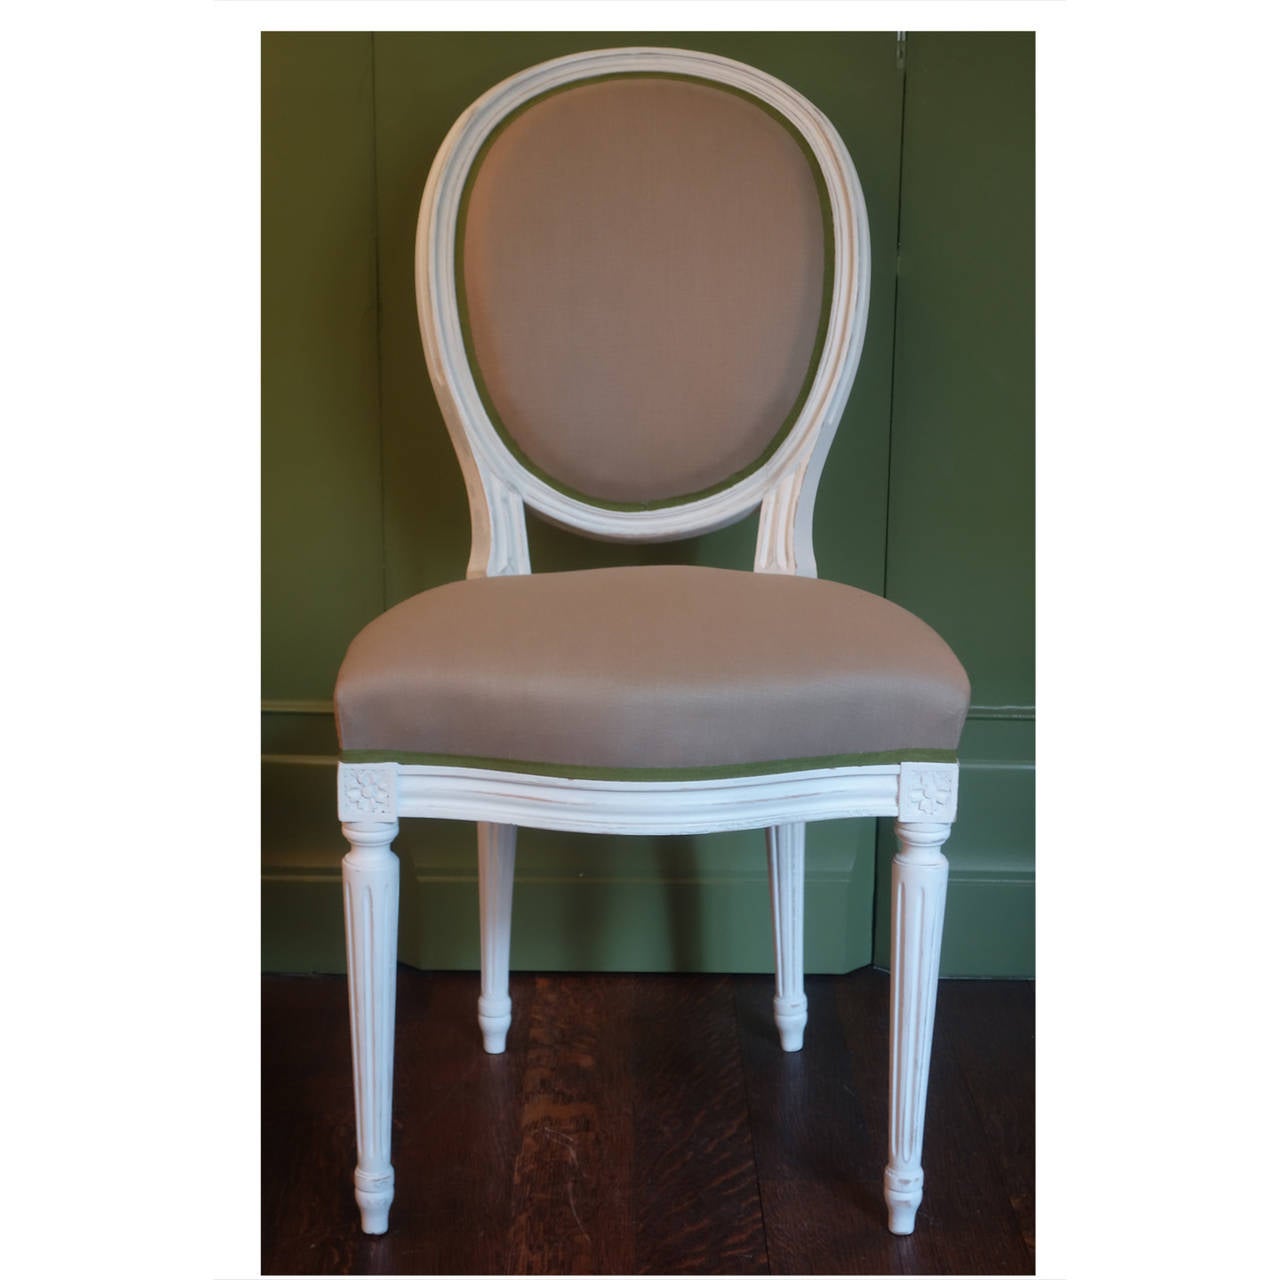 Set of six Louis XVI style dining chairs, circa 1900.  Newly upholstered in oyster and celery linen with contrasting grosgrain trim.  Paint has been refreshed.